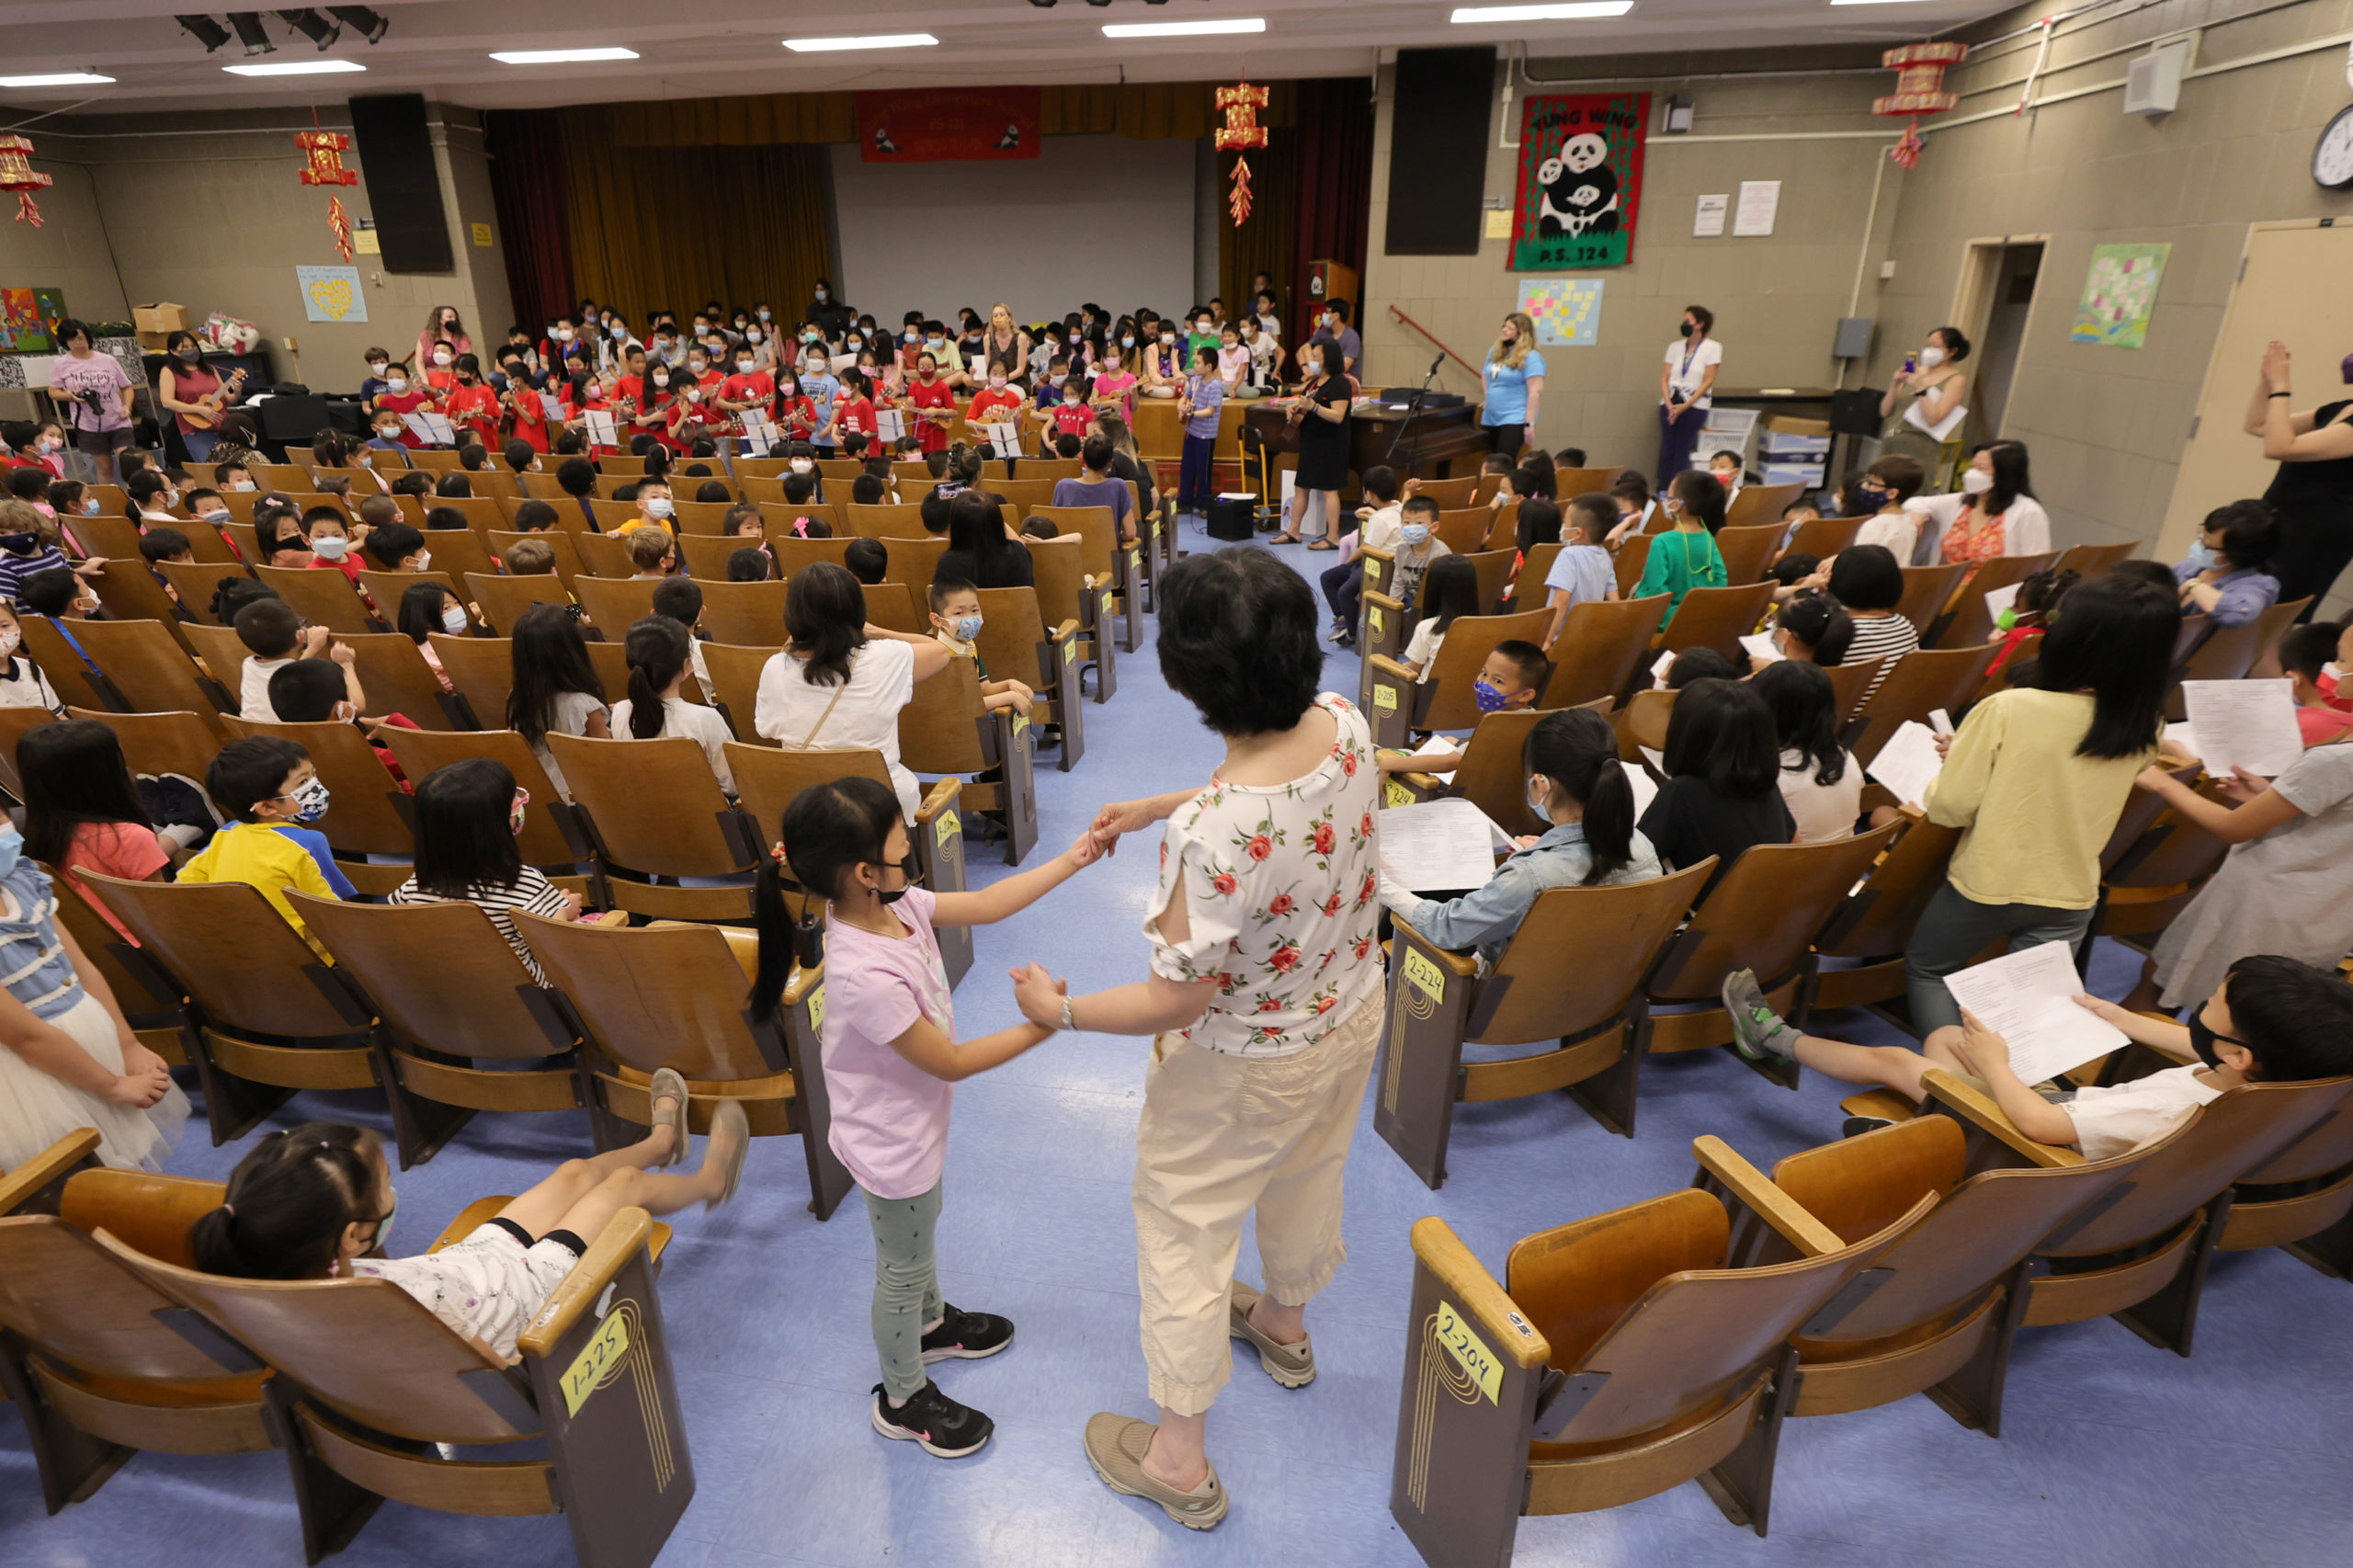 Principal Alice Hom dances with a student during a celebration on the last day of the school year, and her last day as principal of Yung Wing school P.S. 124 on June 27, 2022 in New York City. Hom served for more than 39 years in education, including 19 years as principal at P.S. 124. (Photo by Michael Loccisano/Getty Images)